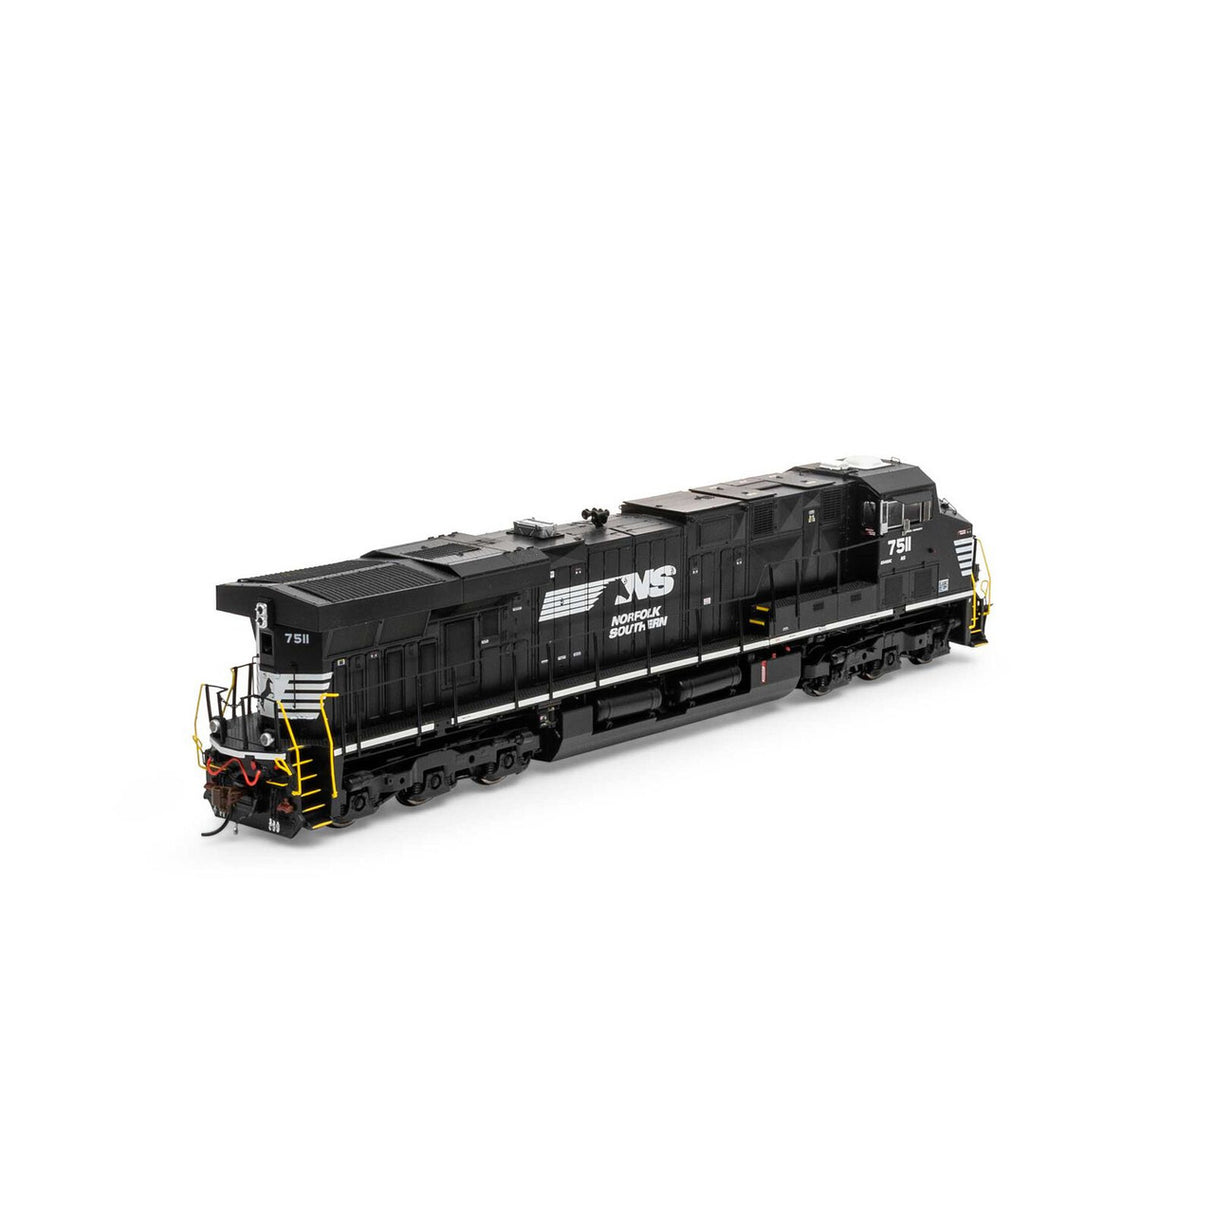 Athearn ATHG83195 GE ES40DC NS Norfolk Southern #7511 with DCC & Sound Tsunami2 HO Scale